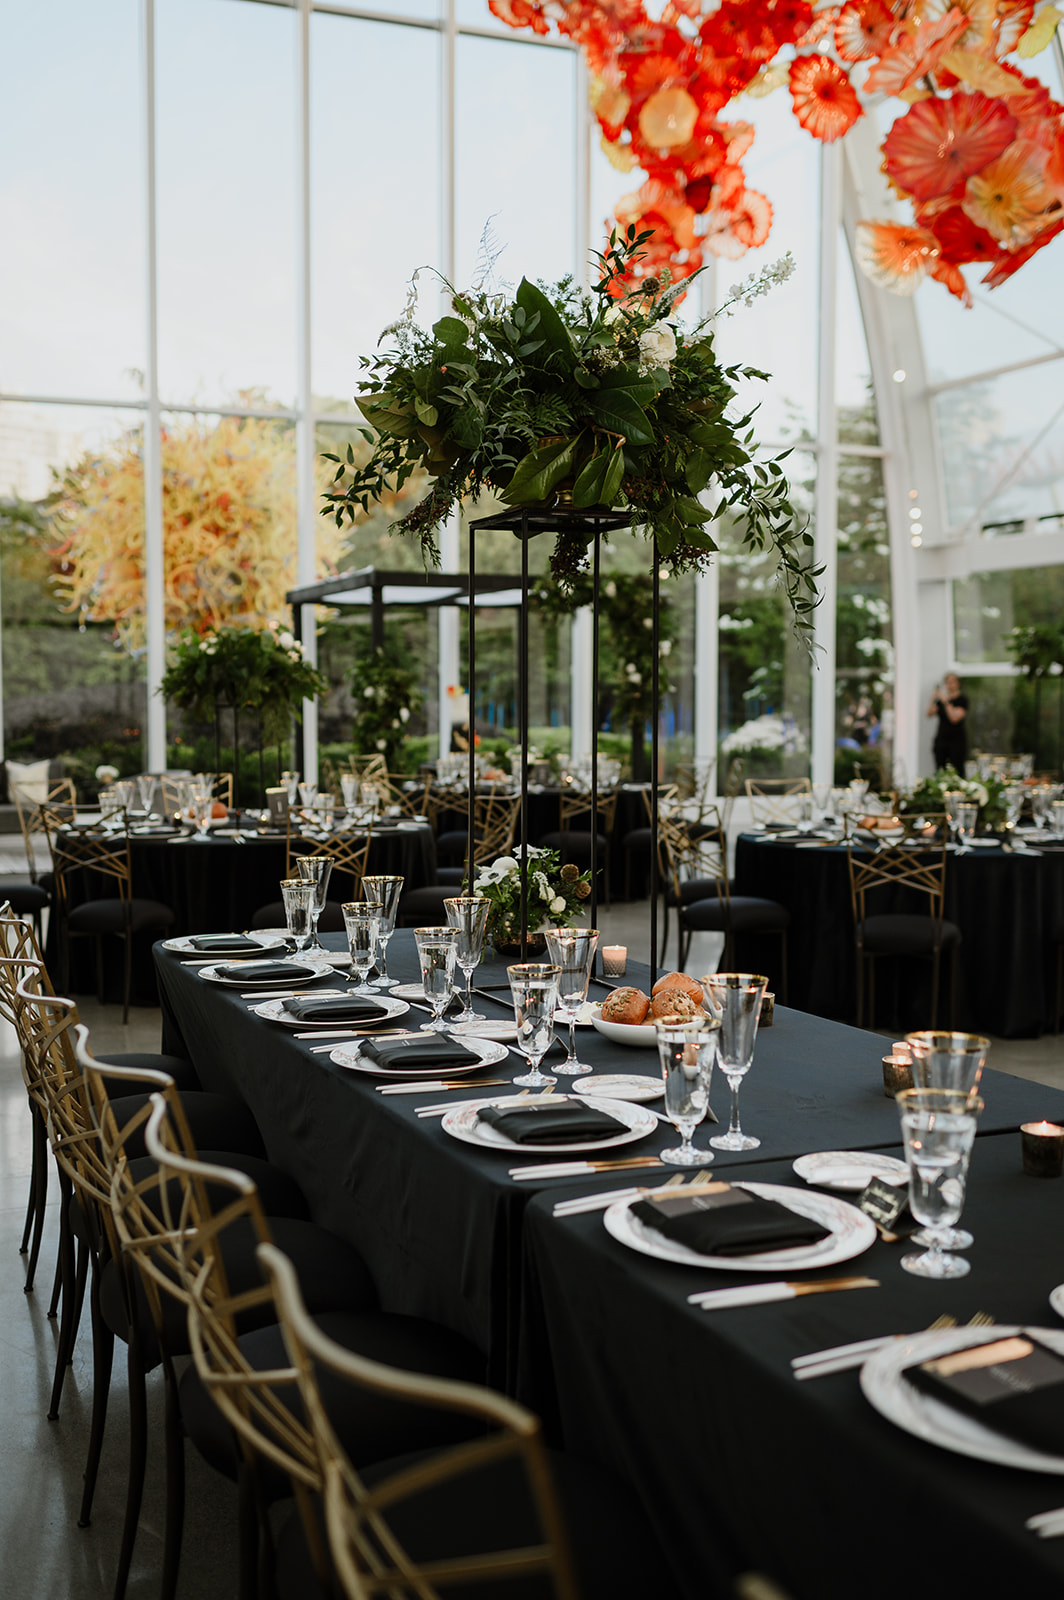 Table settings at Chihuly Garden and Glass with black tablecloths, gold-rimmed glasses, greenery centerpieces, under a vibrant glass flower ceiling installation.